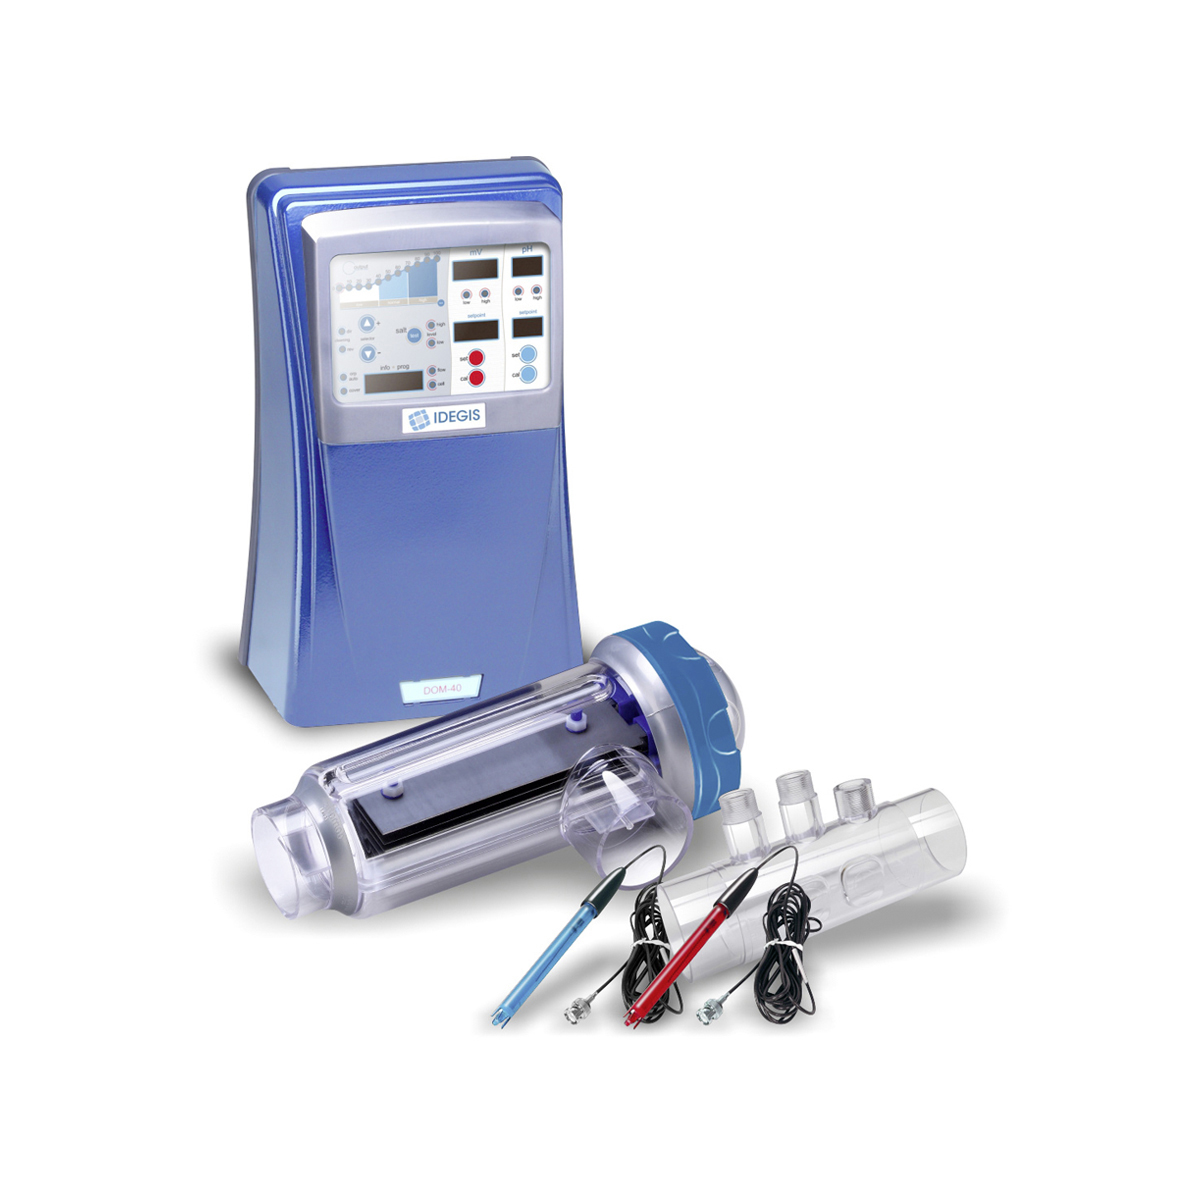 Salt Electrolysis System DOMOTIC PH-ORP 12G self cleaning with integrated PH-ORP control 12 g chlorine/hour for private pools up to 50 m³ Salt Electrolysis System DOMOTIC PH-ORP 12G self cleaning with integrated PH-ORP control 12 g chlorine/hour for private pools up to 50 m³